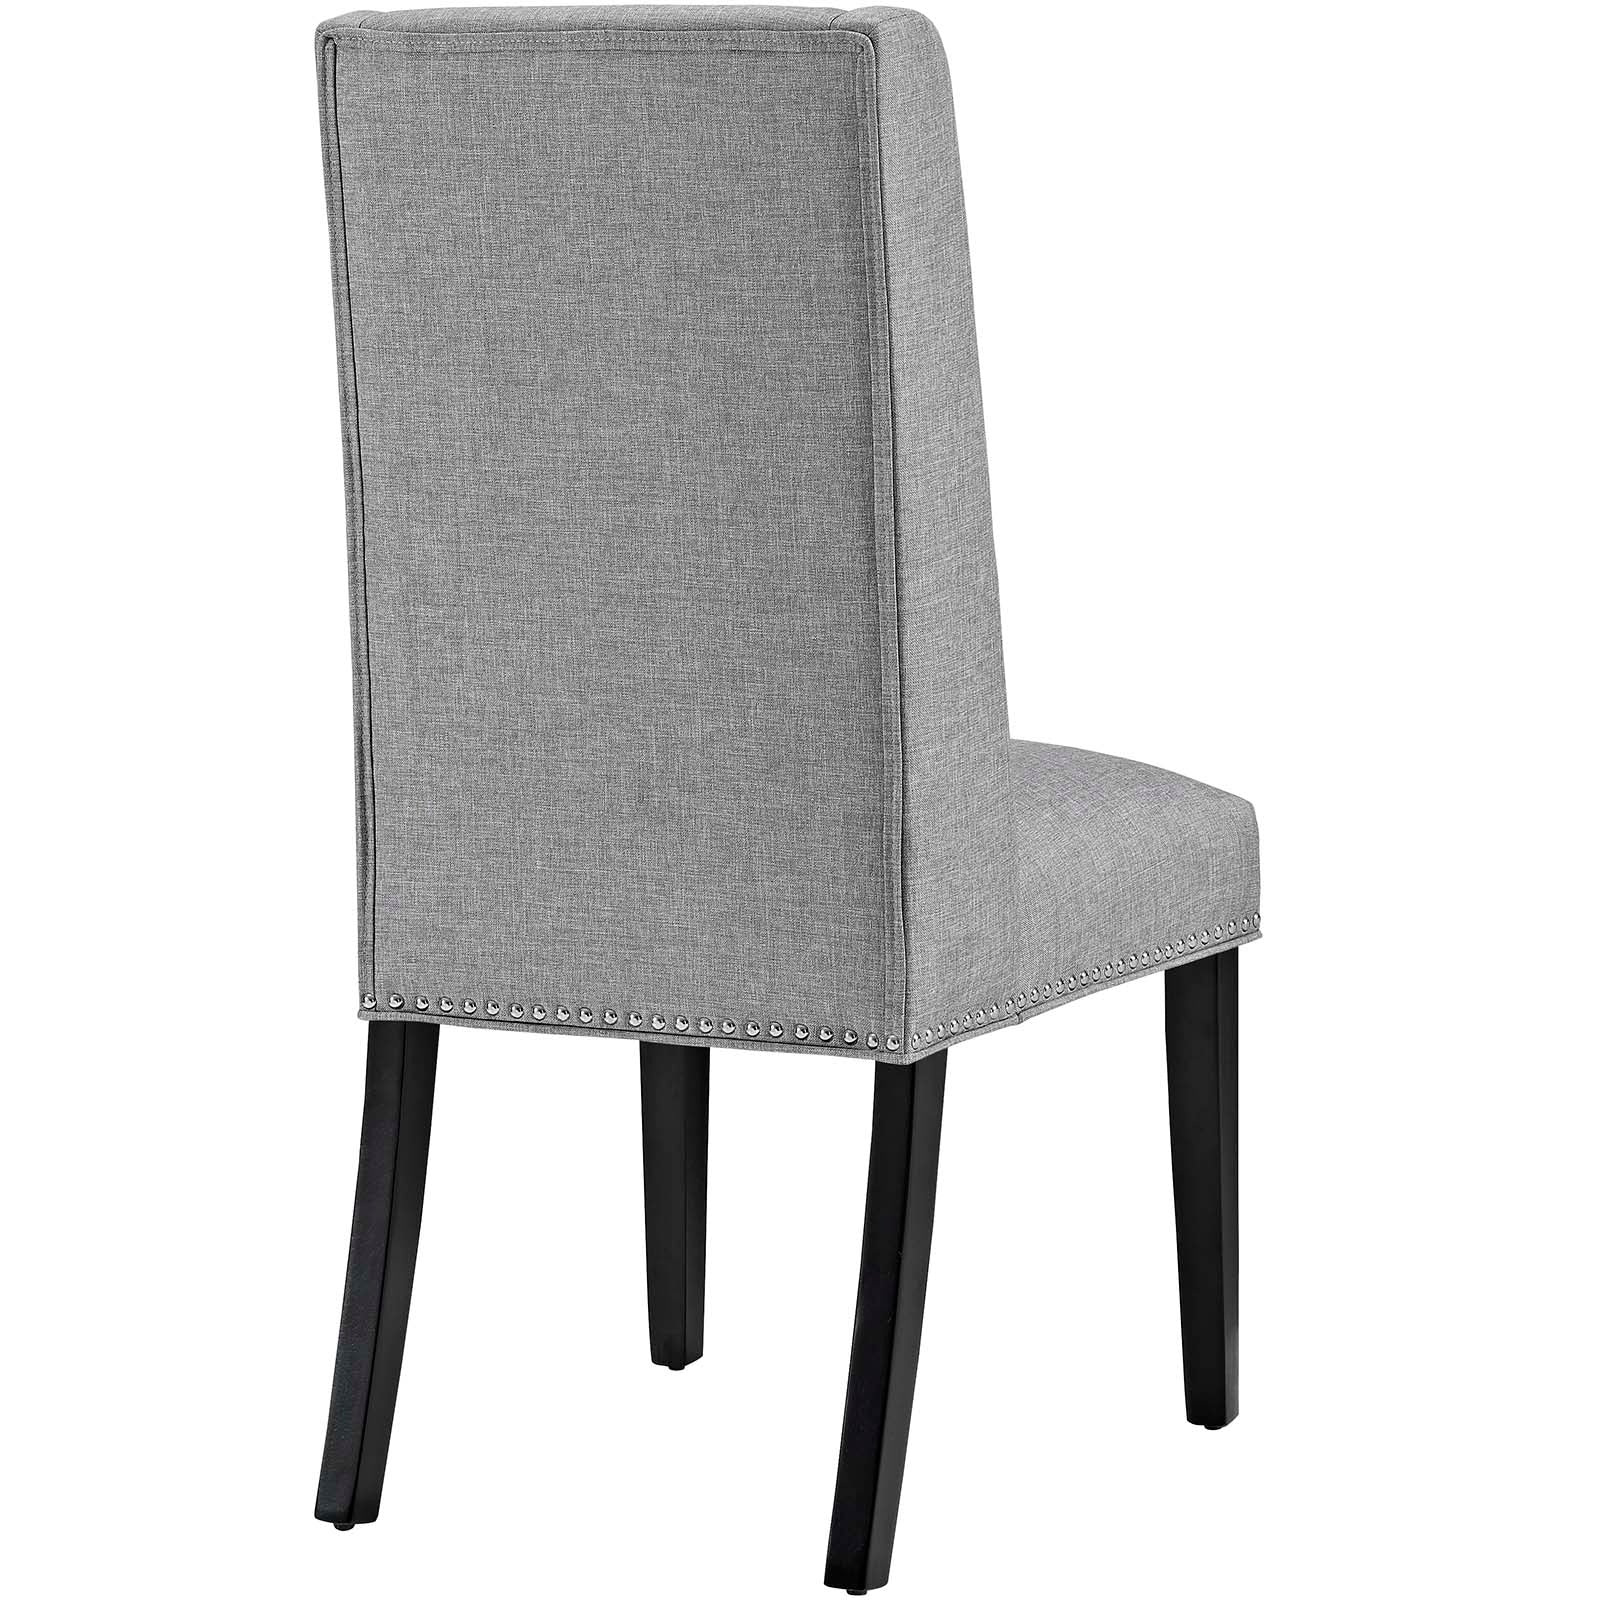 Modway Dining Chairs - Baron Dining Chair Fabric Light Gray (Set of 2)